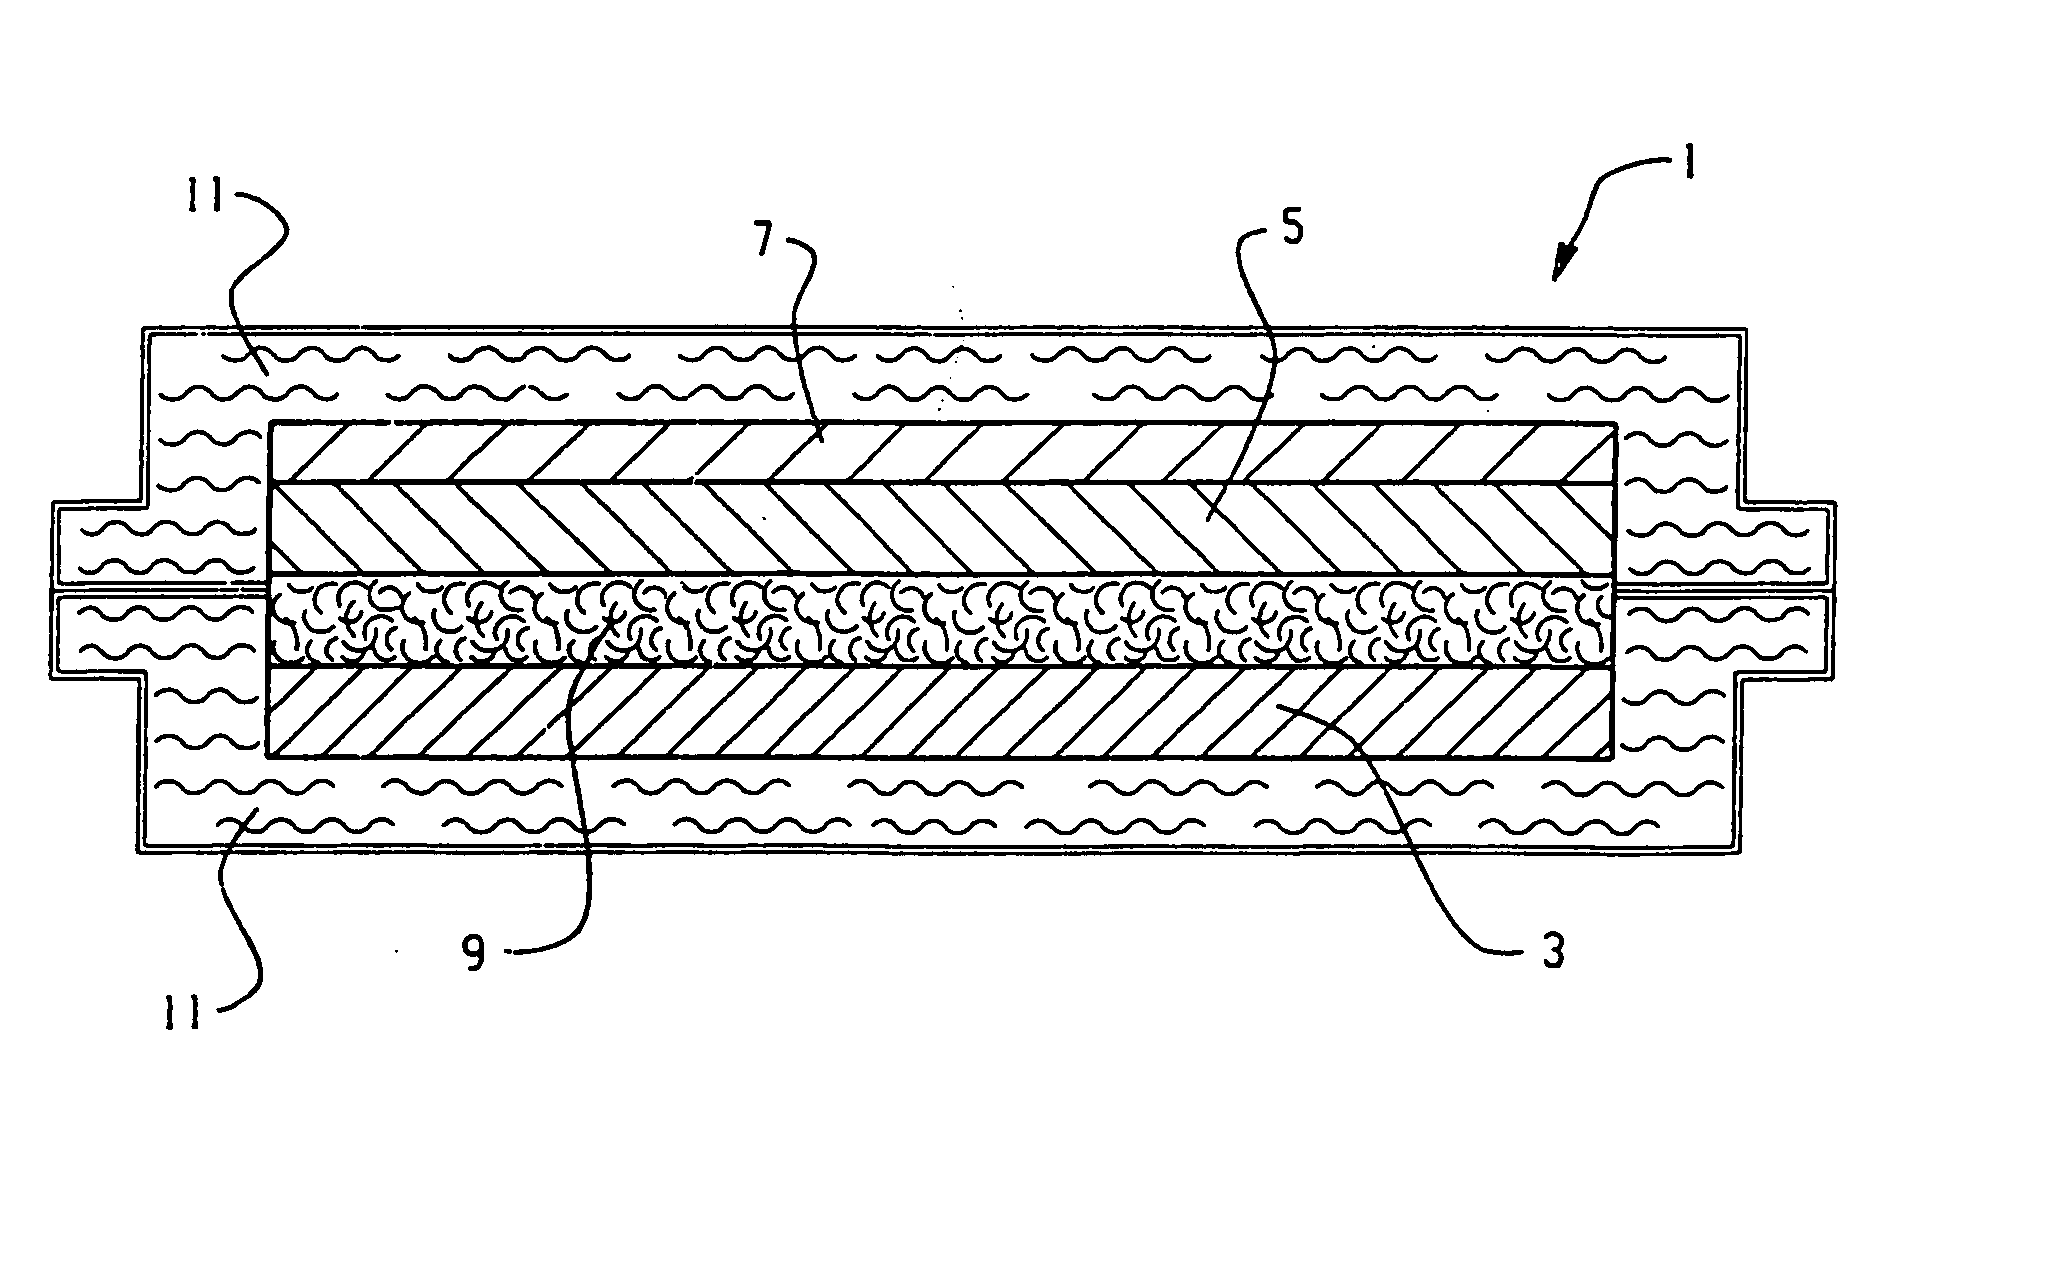 Flexible thin printed battery and device and method of manufacturing same